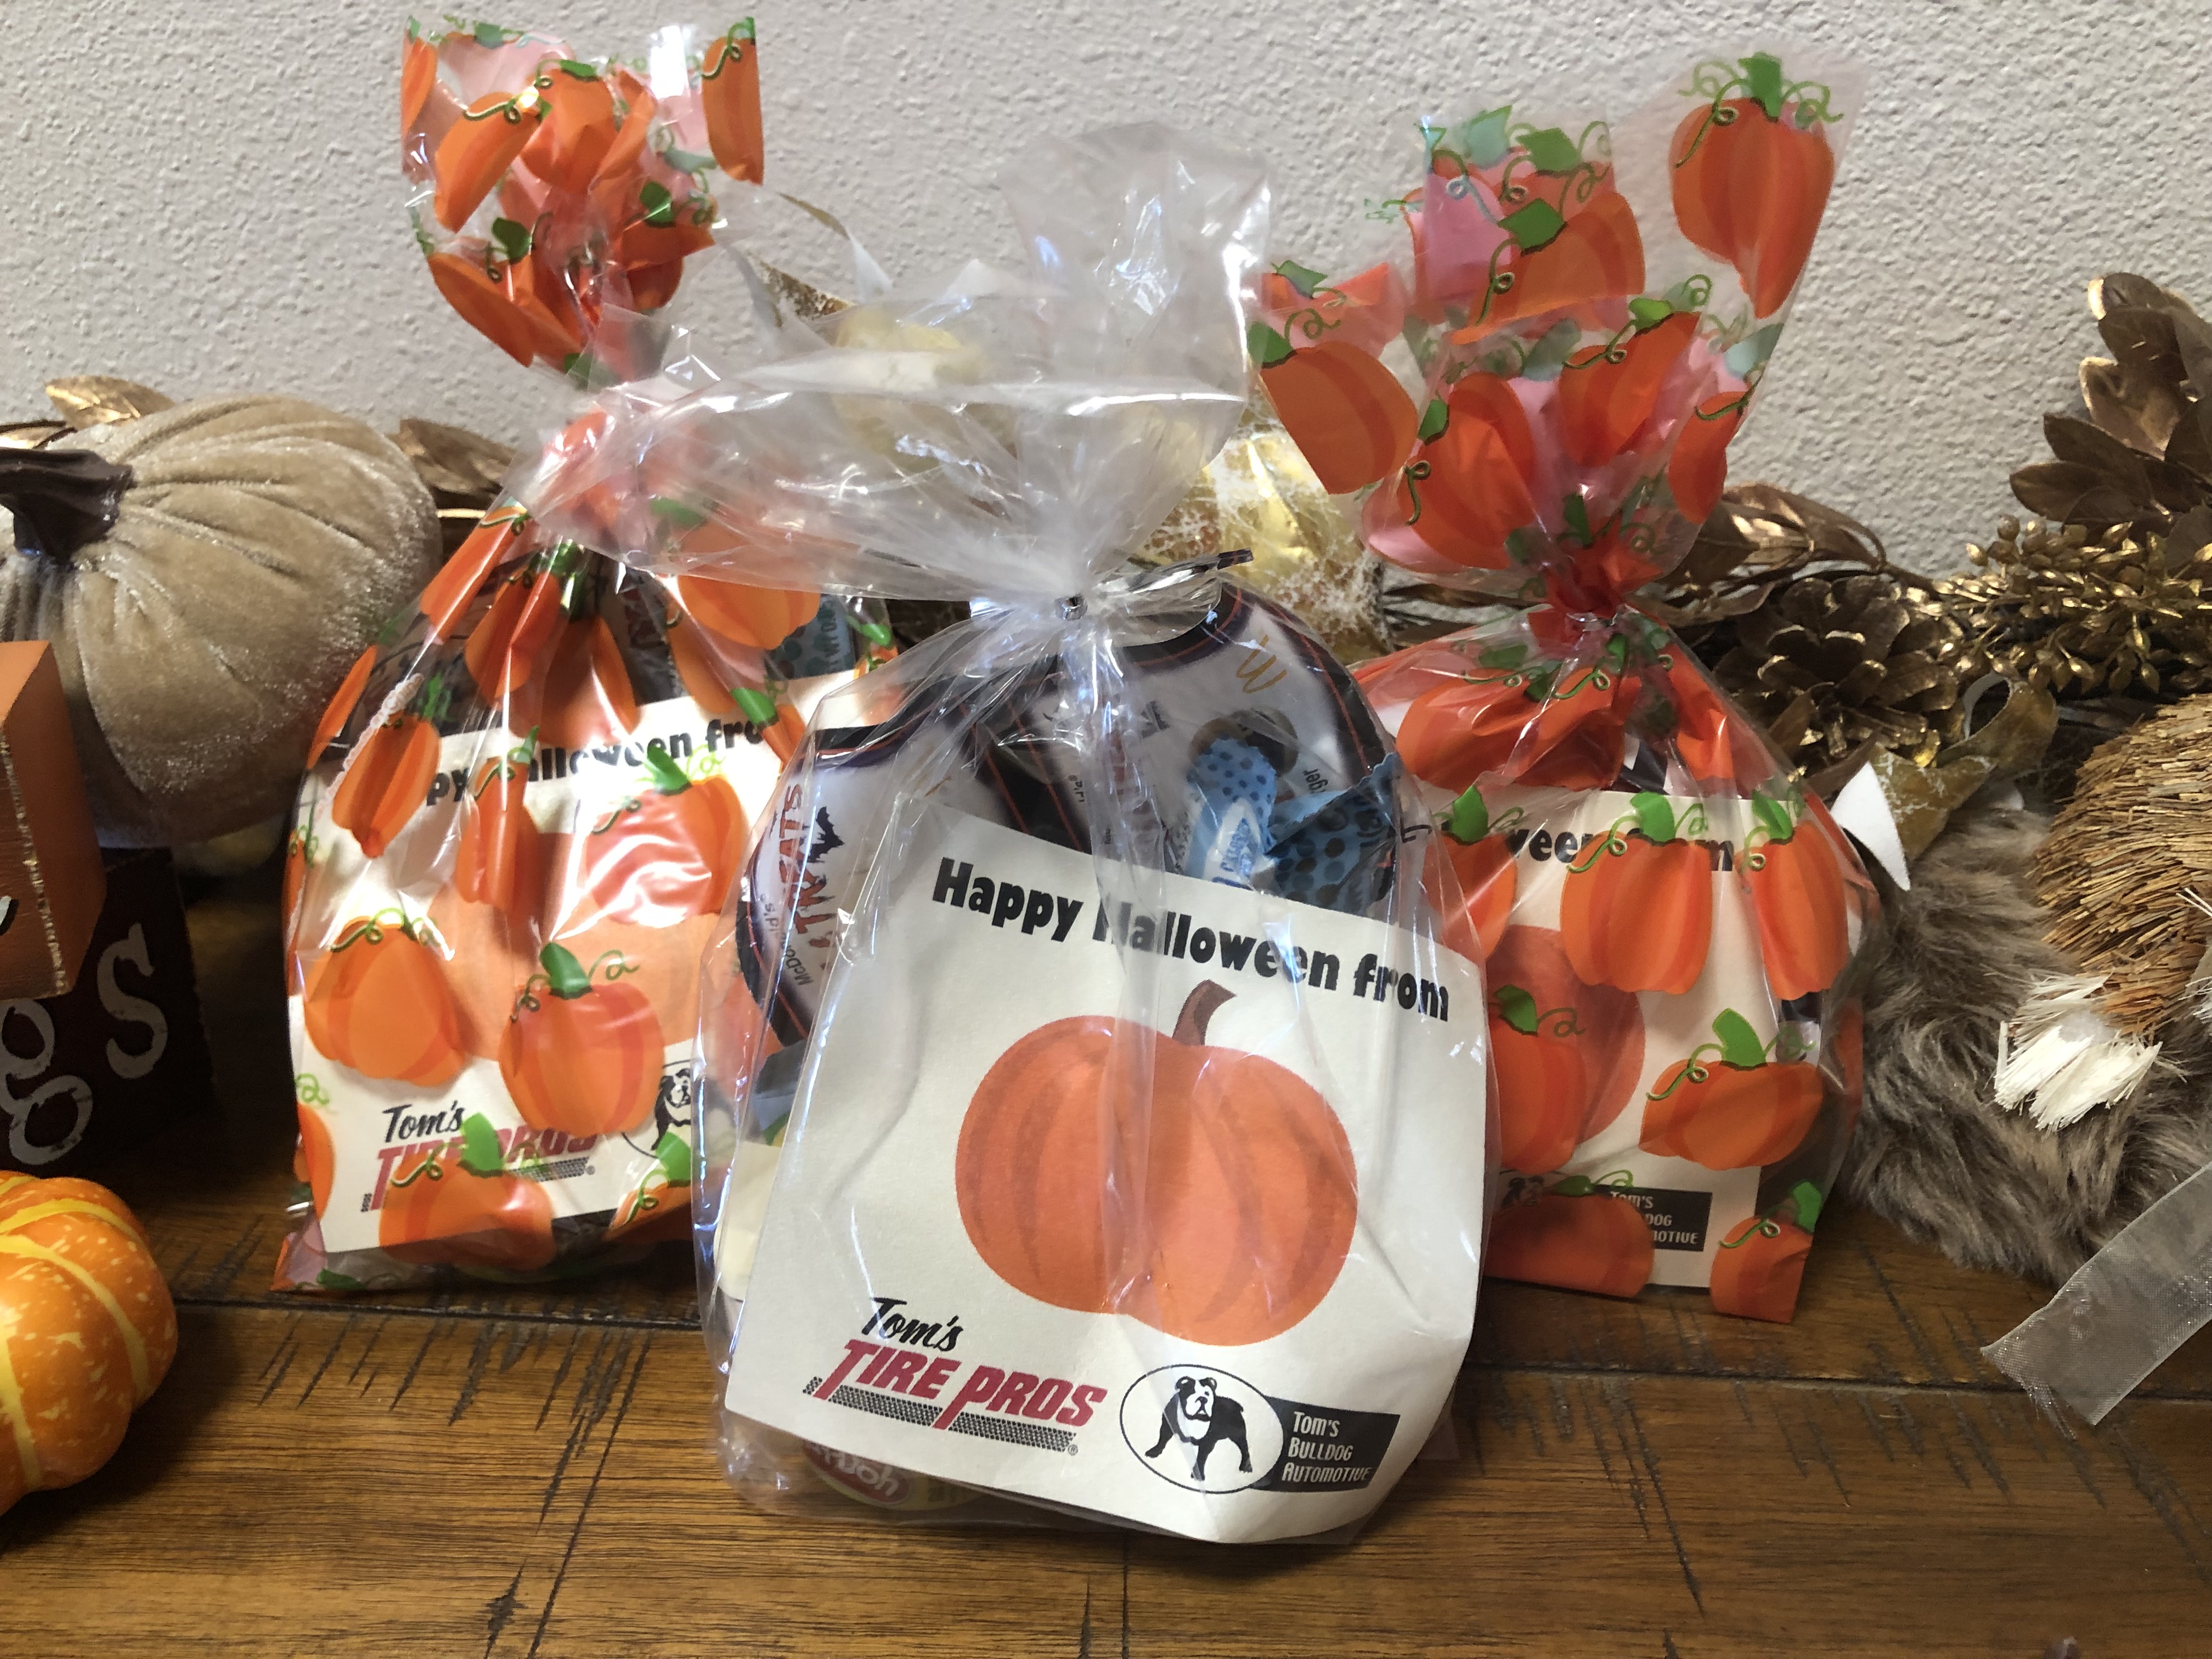 Annual Halloween Goodie Bags for Kids!